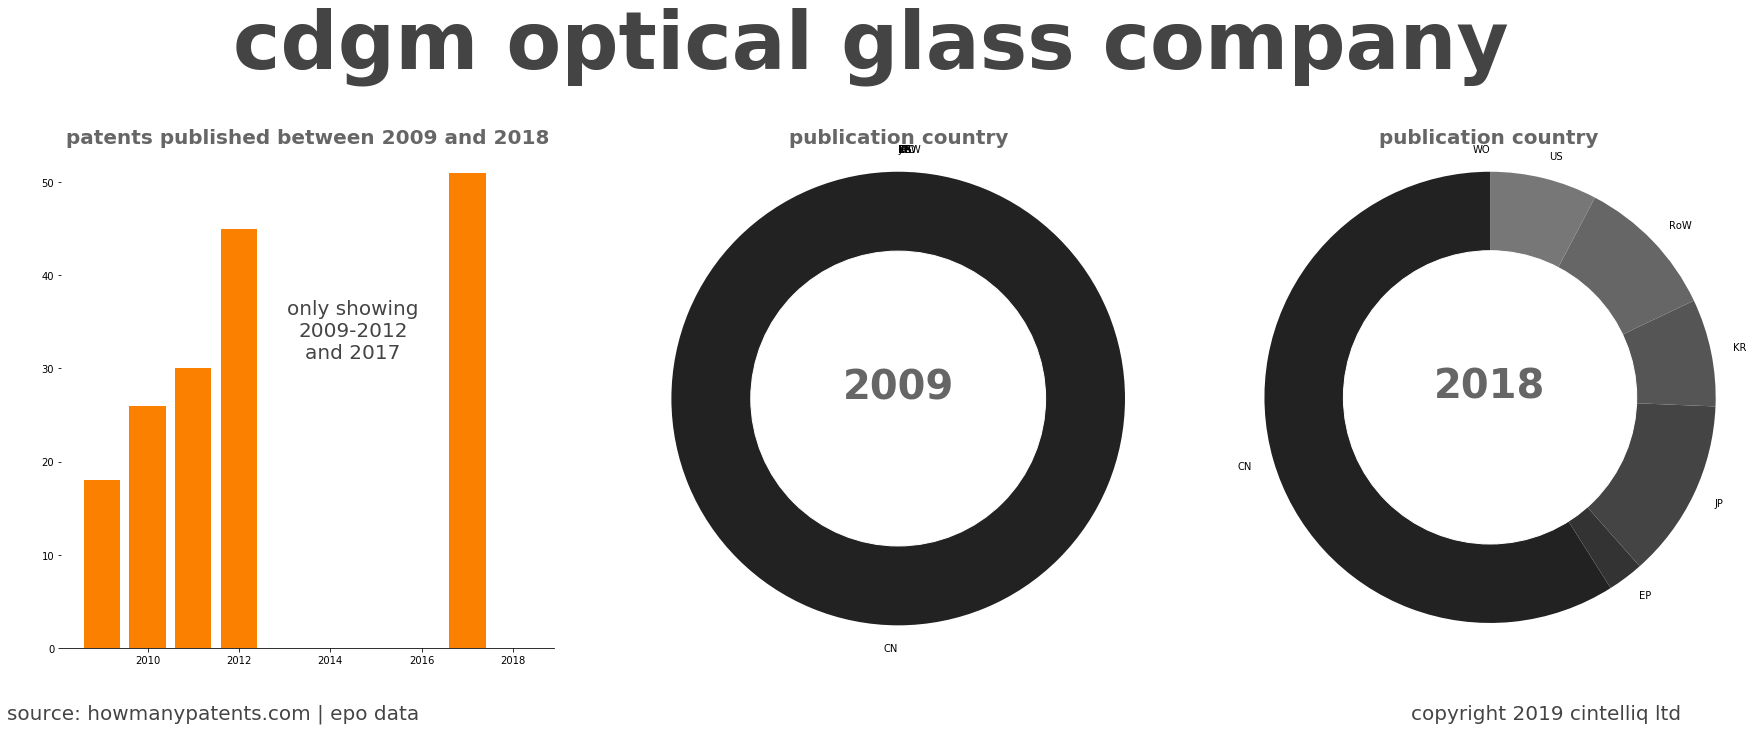 summary of patents for Cdgm Optical Glass Company